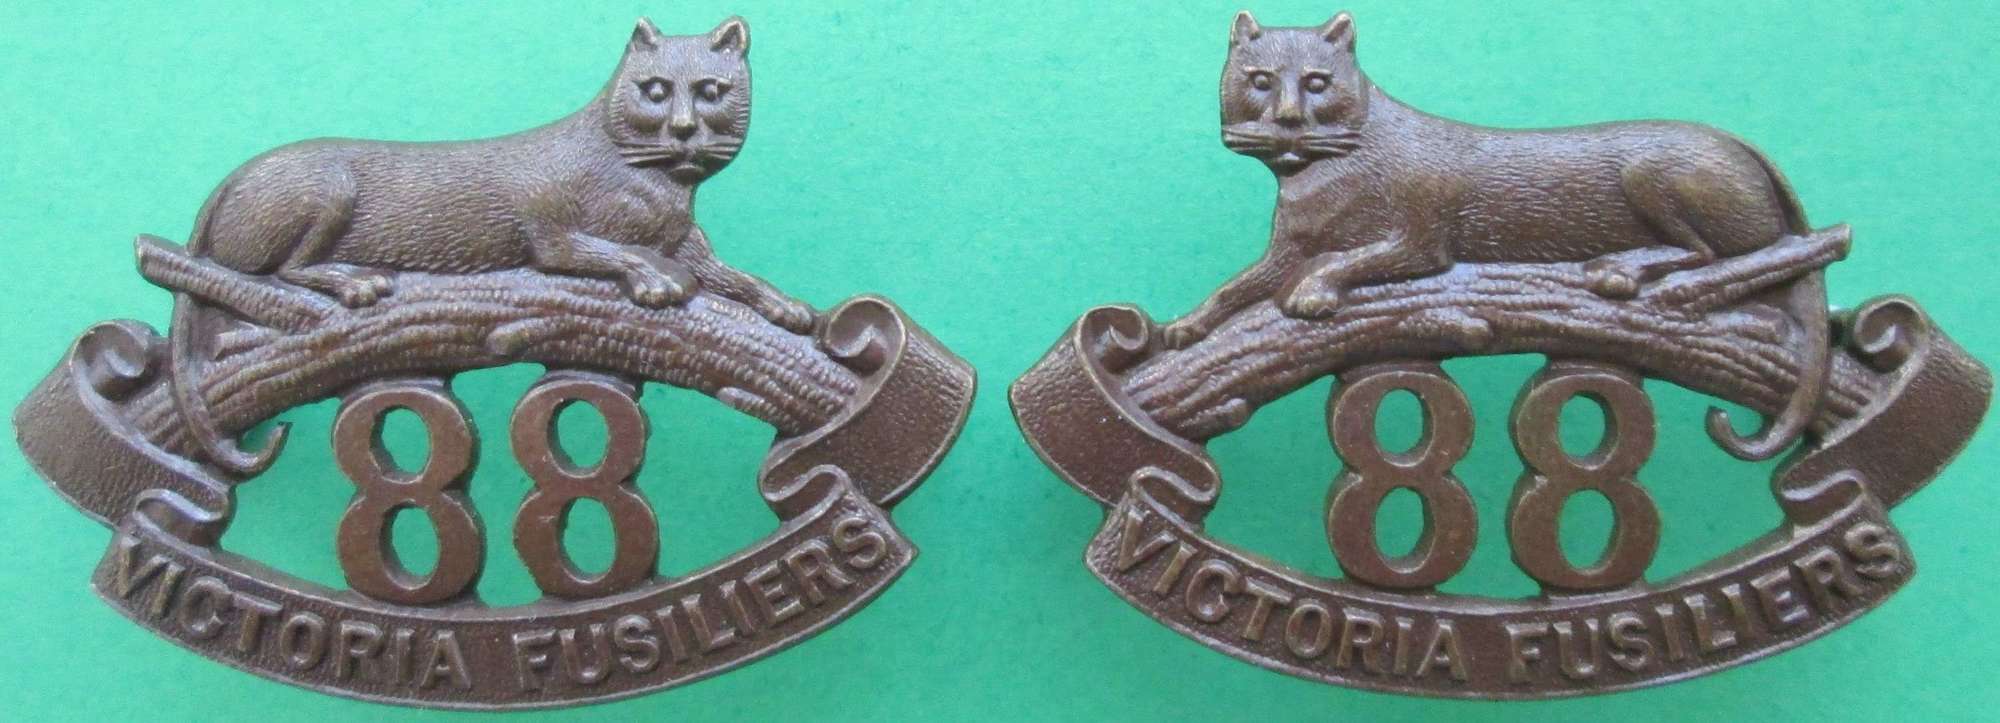 A PAIR OF 88 VICTORIA FUSILIERS BRONZE COLLARS